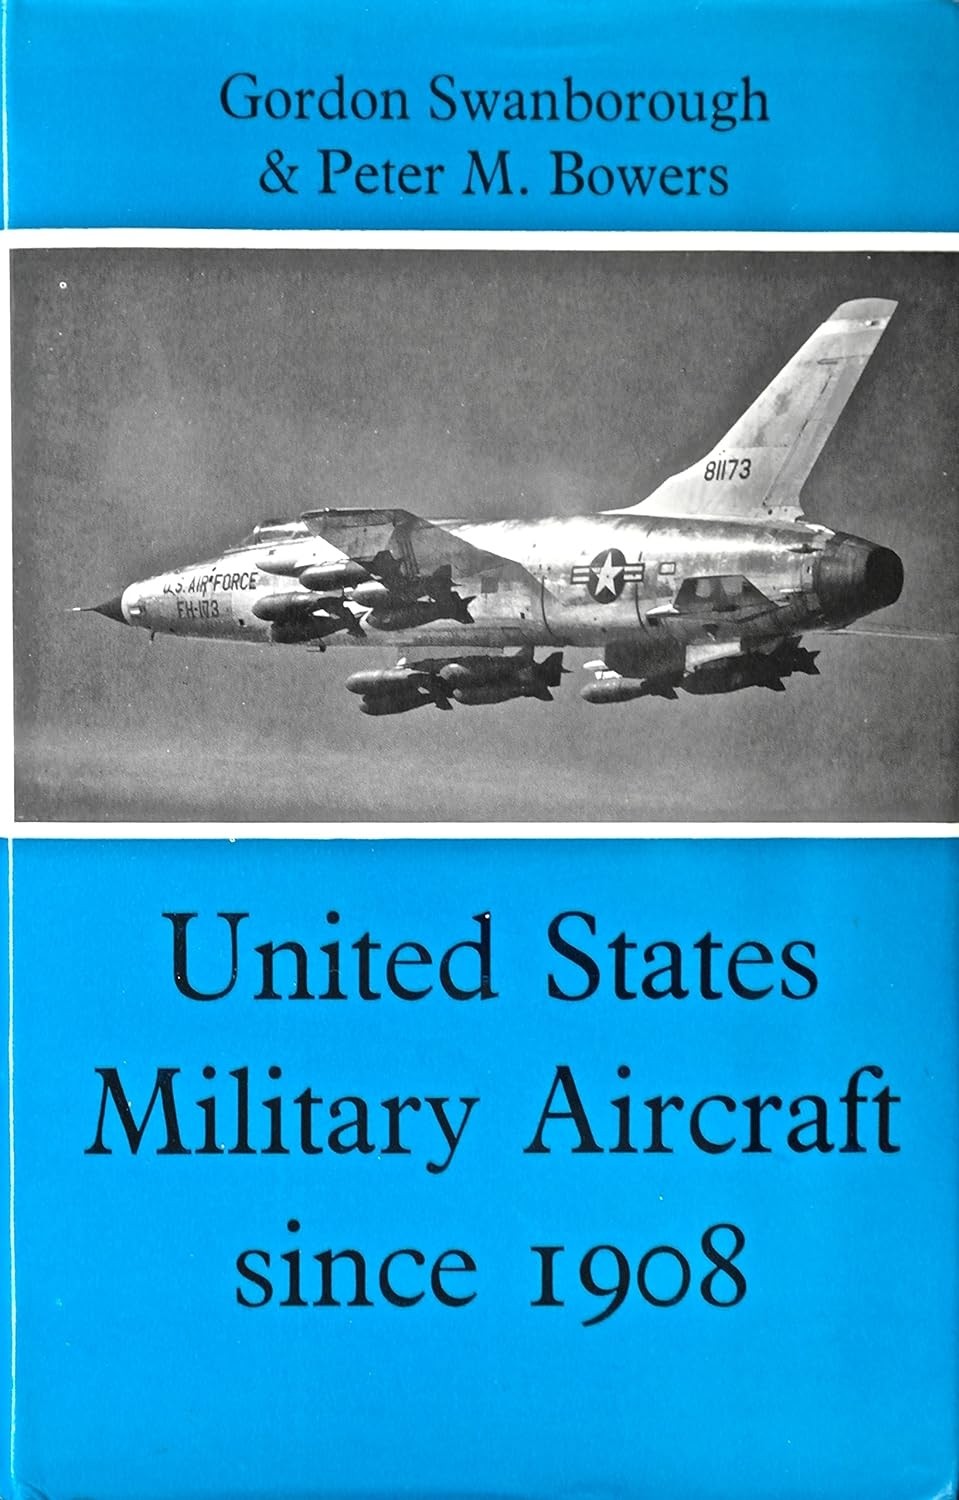 United States military aircraft since 1908